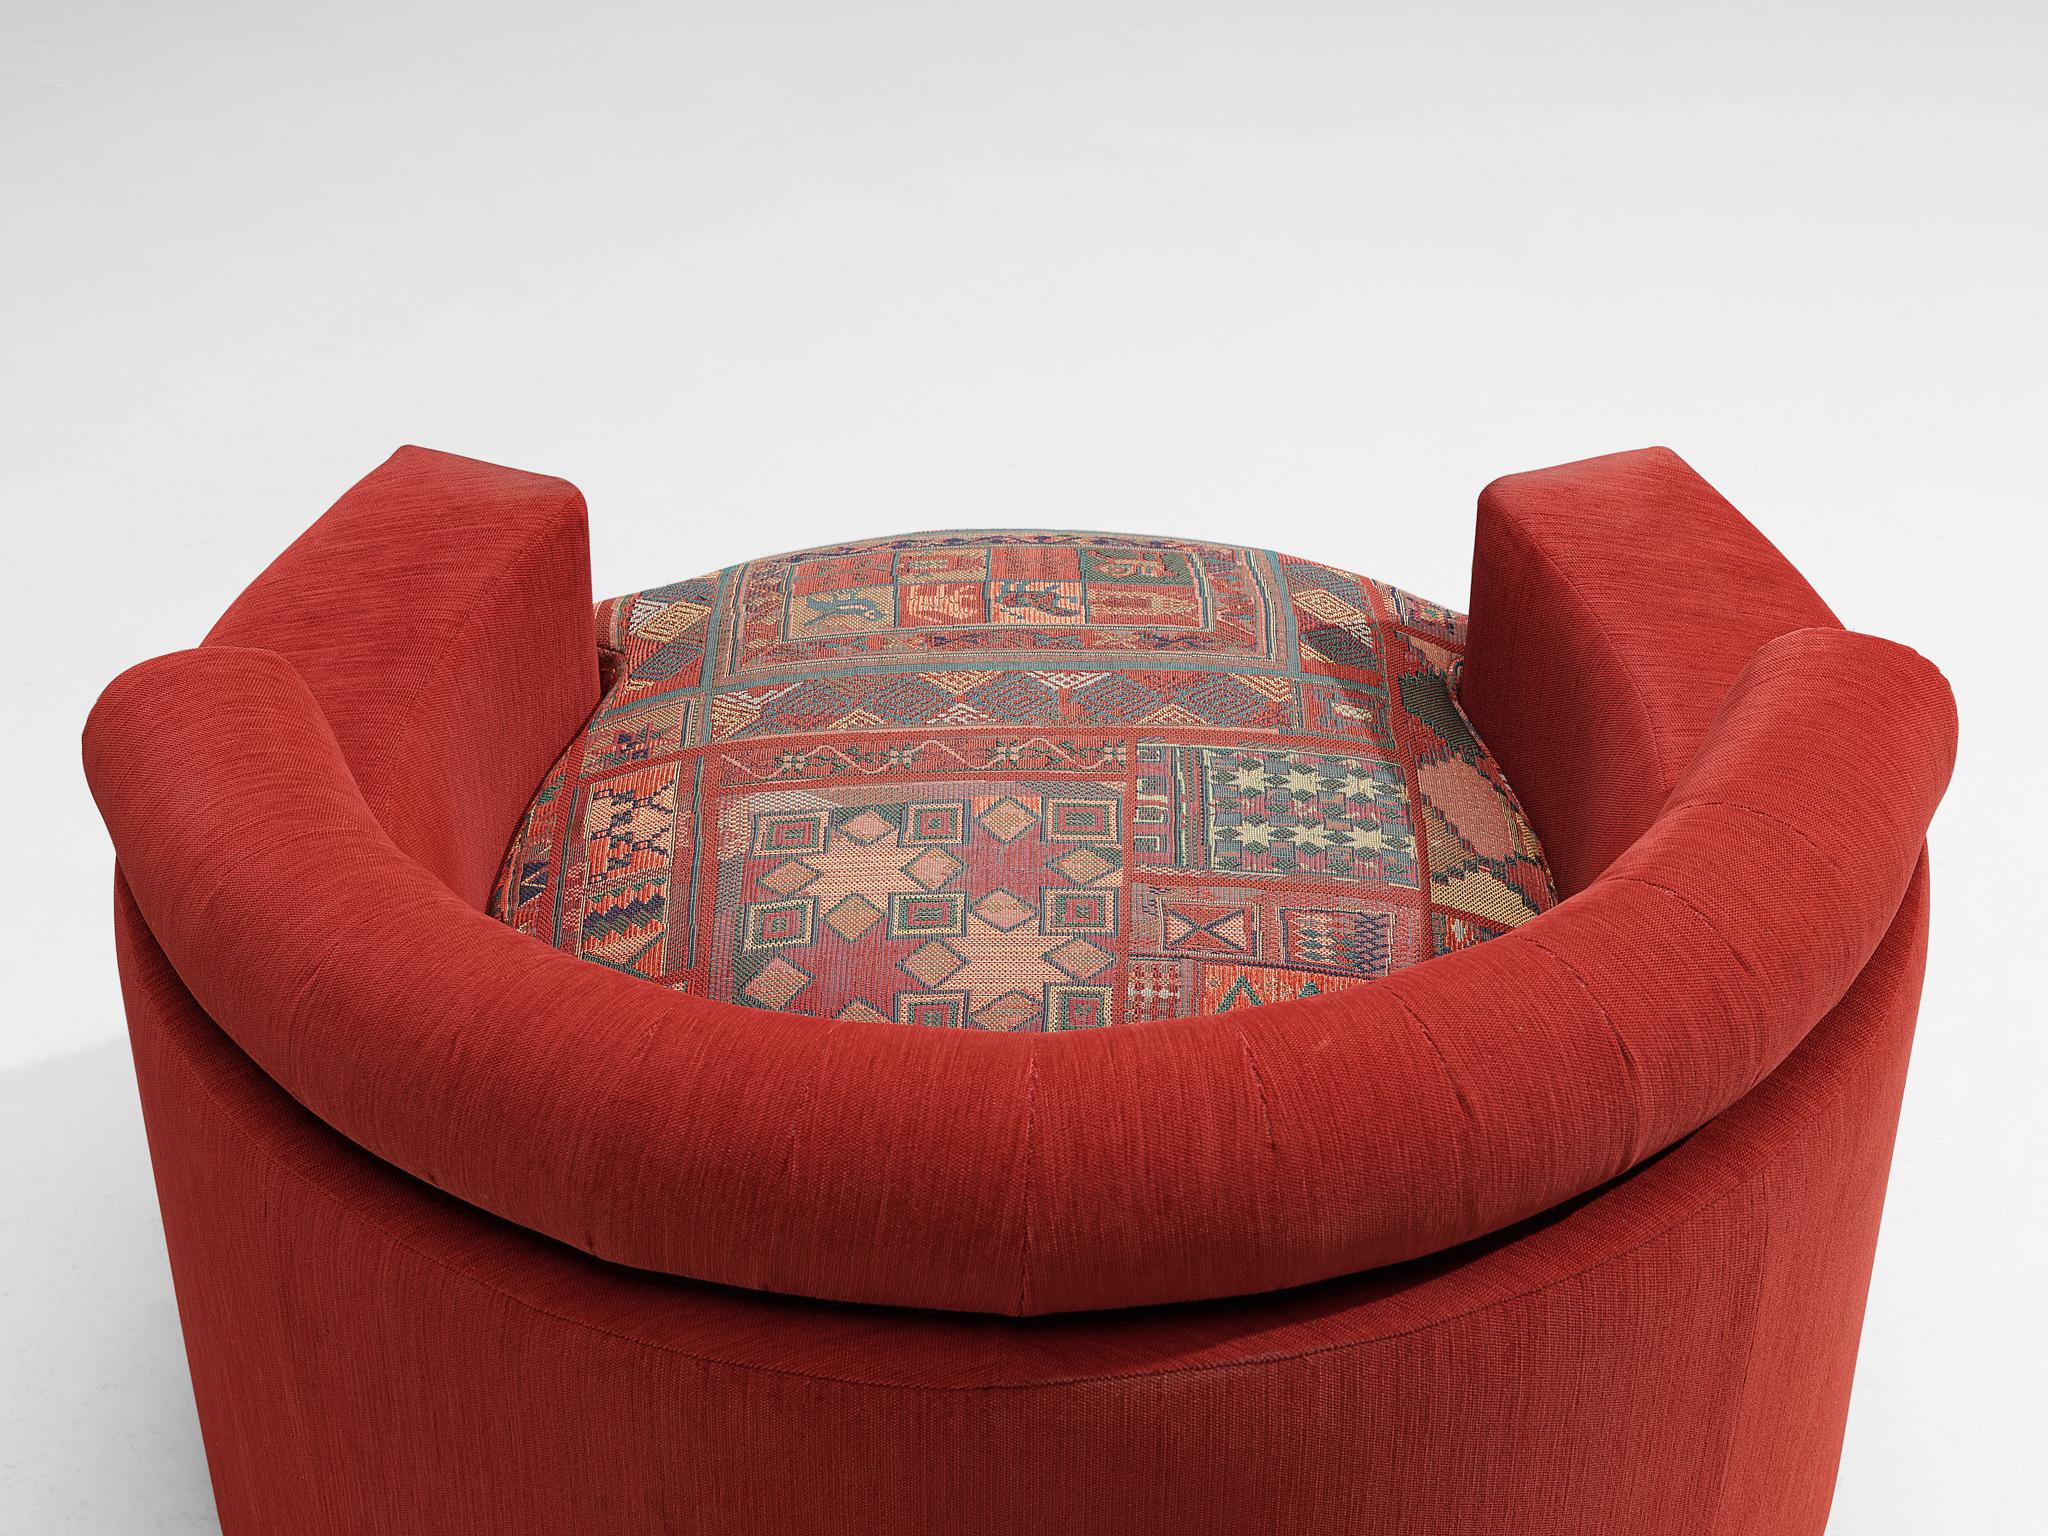 Roche Bobois Pair of Lounge Chairs in Red and Patterned Upholstery For Sale 4